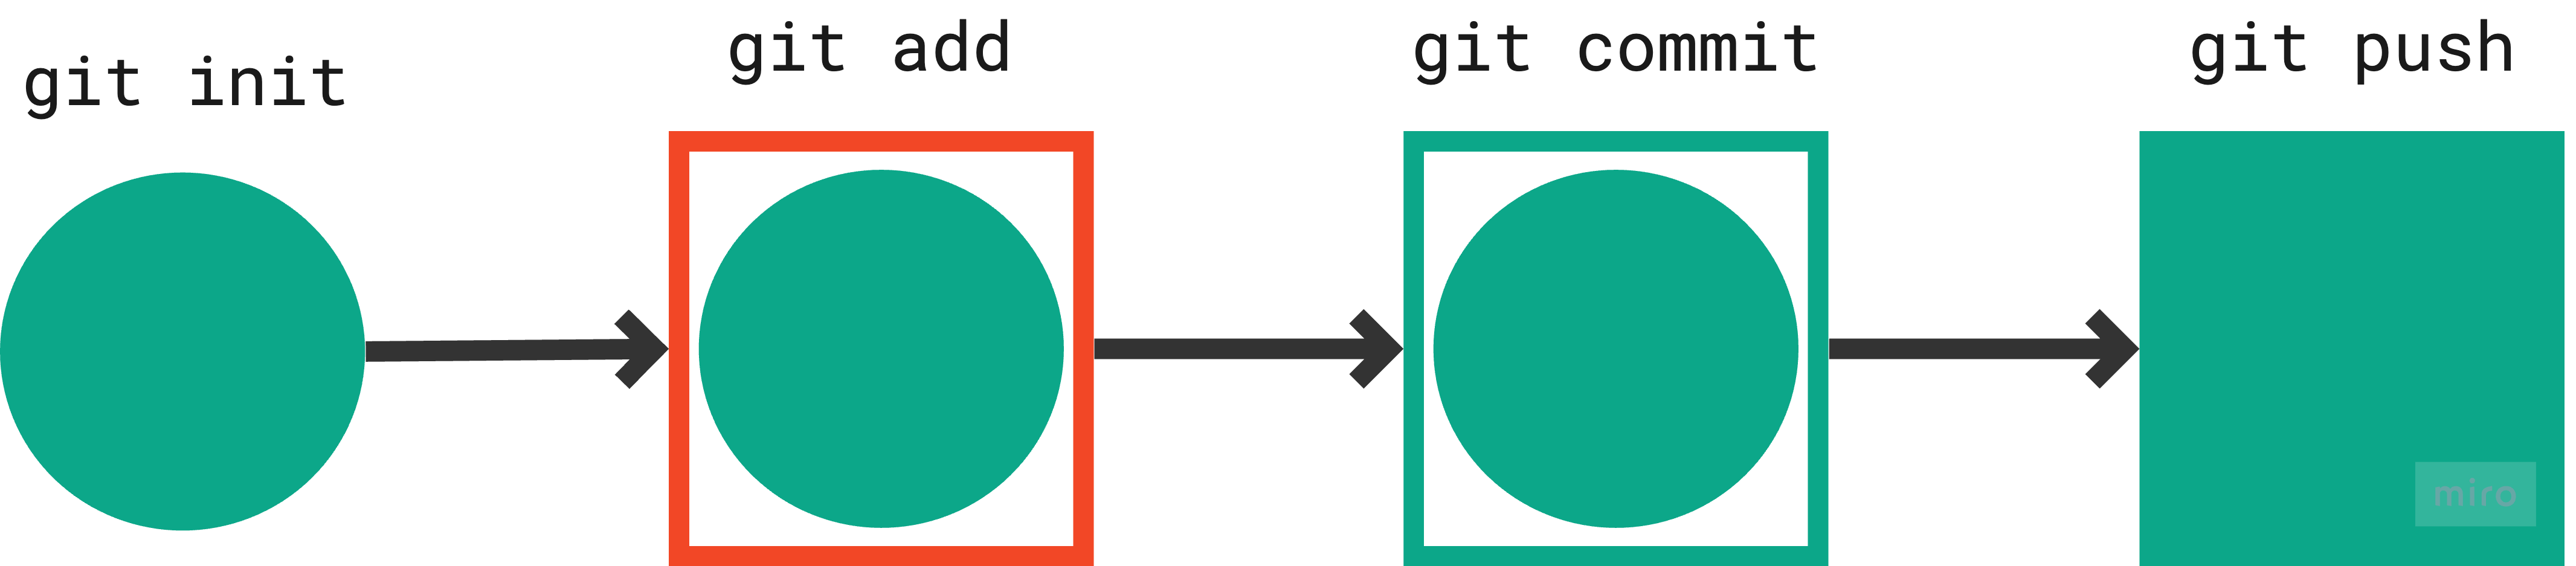 git commit and push